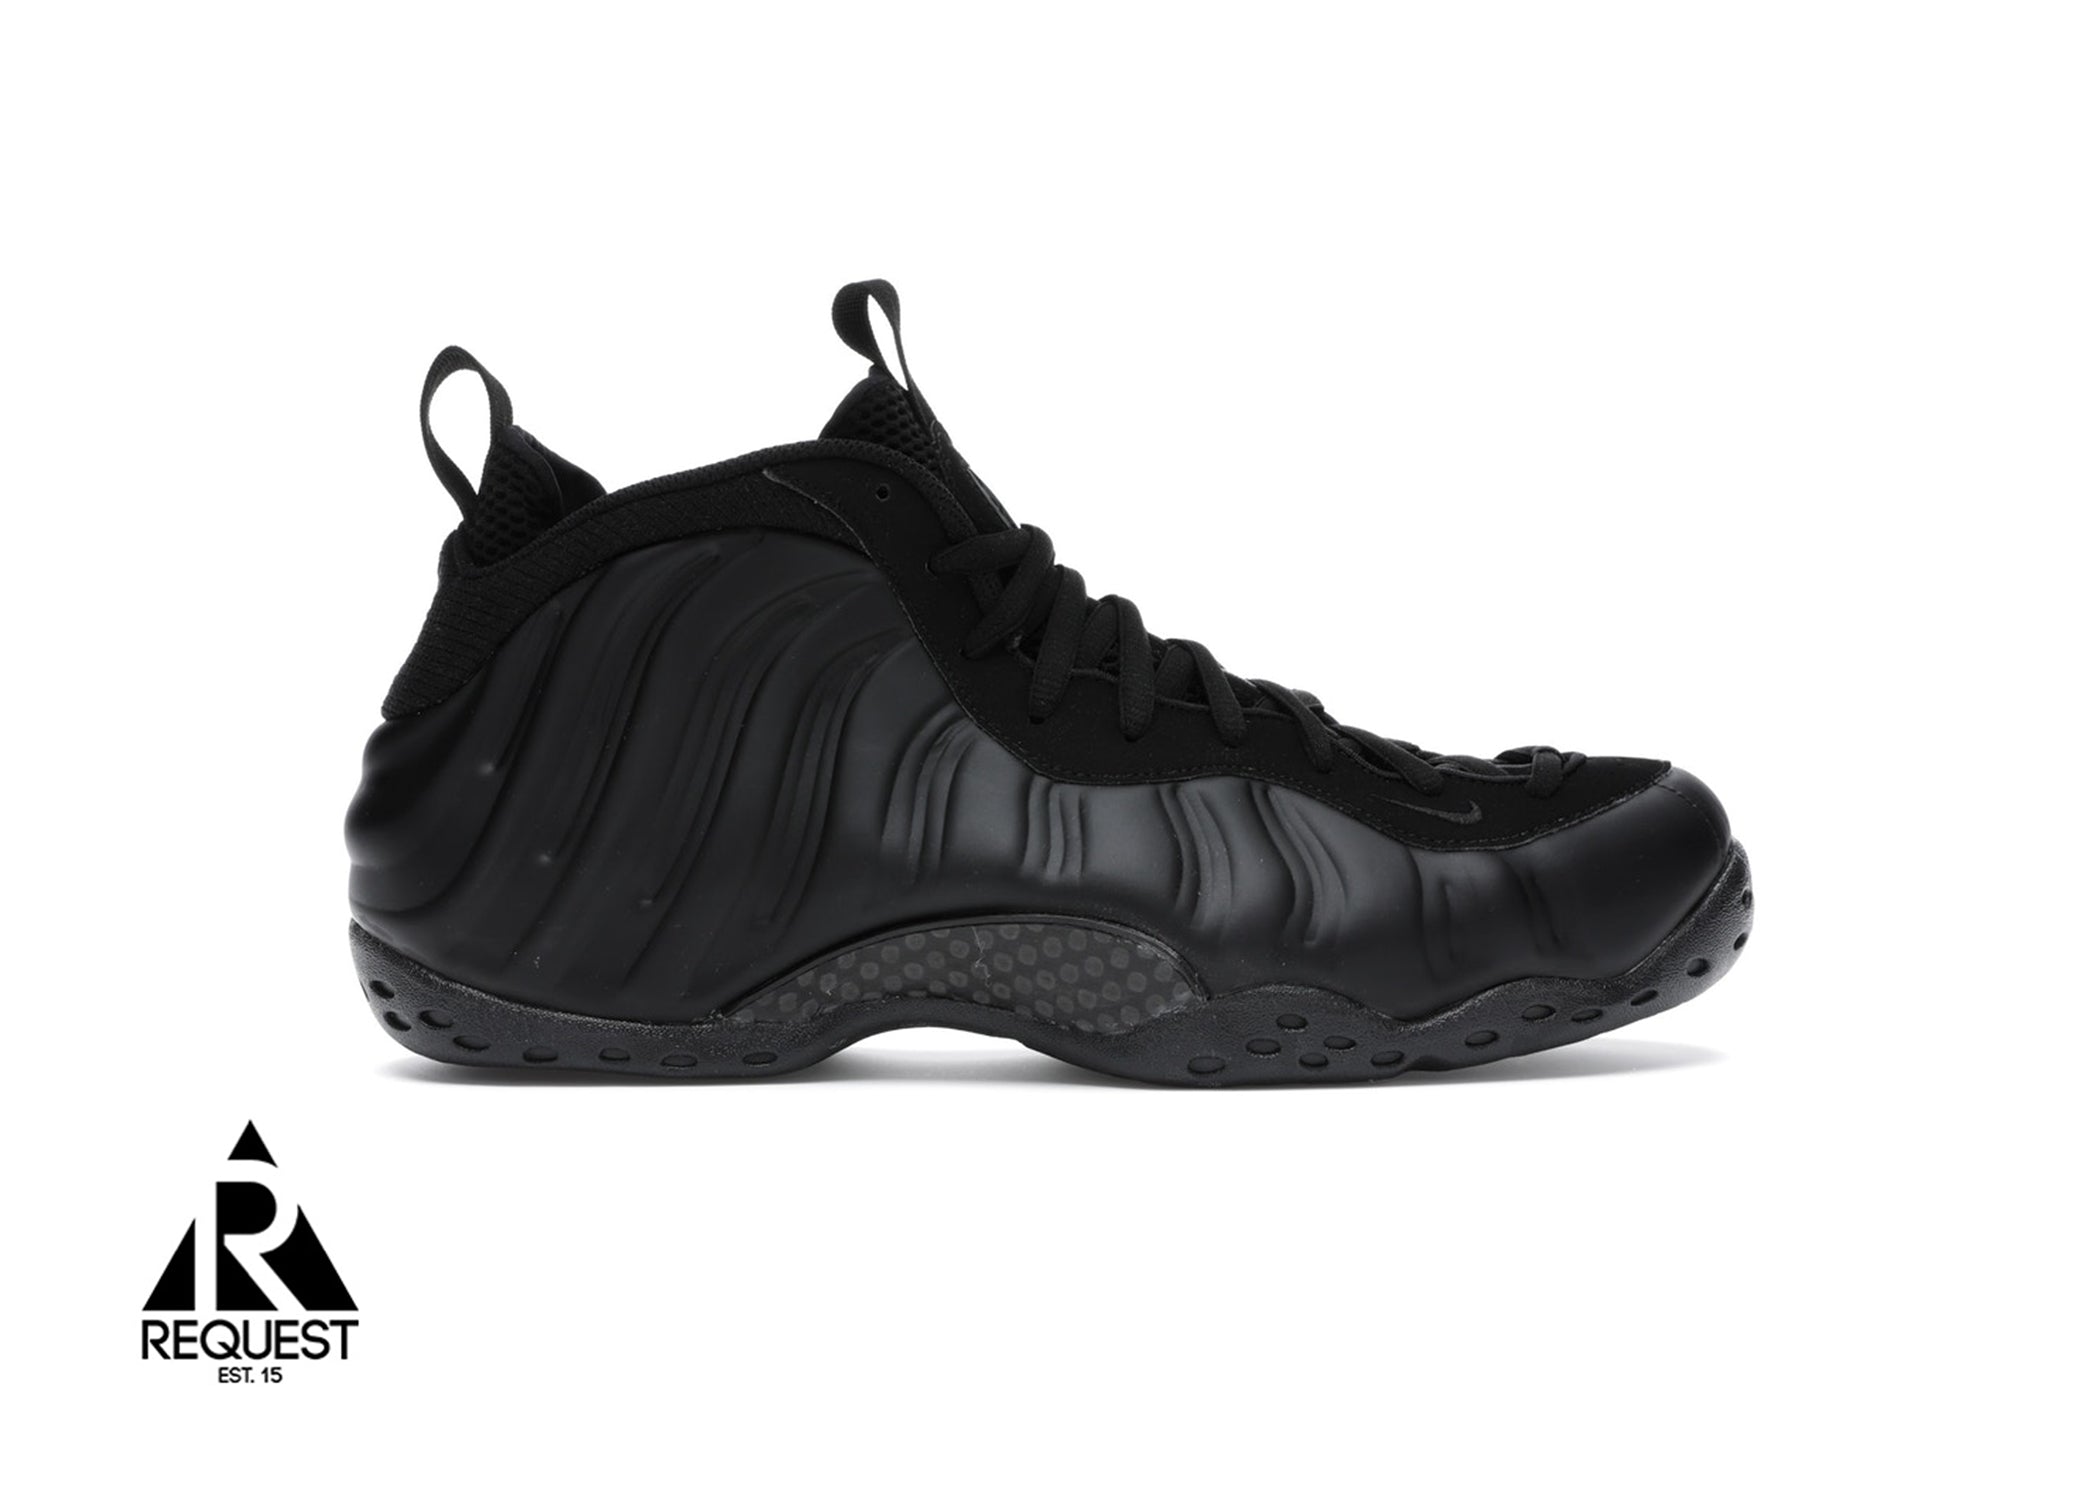 Nike Air Foamposite “Anthracite”